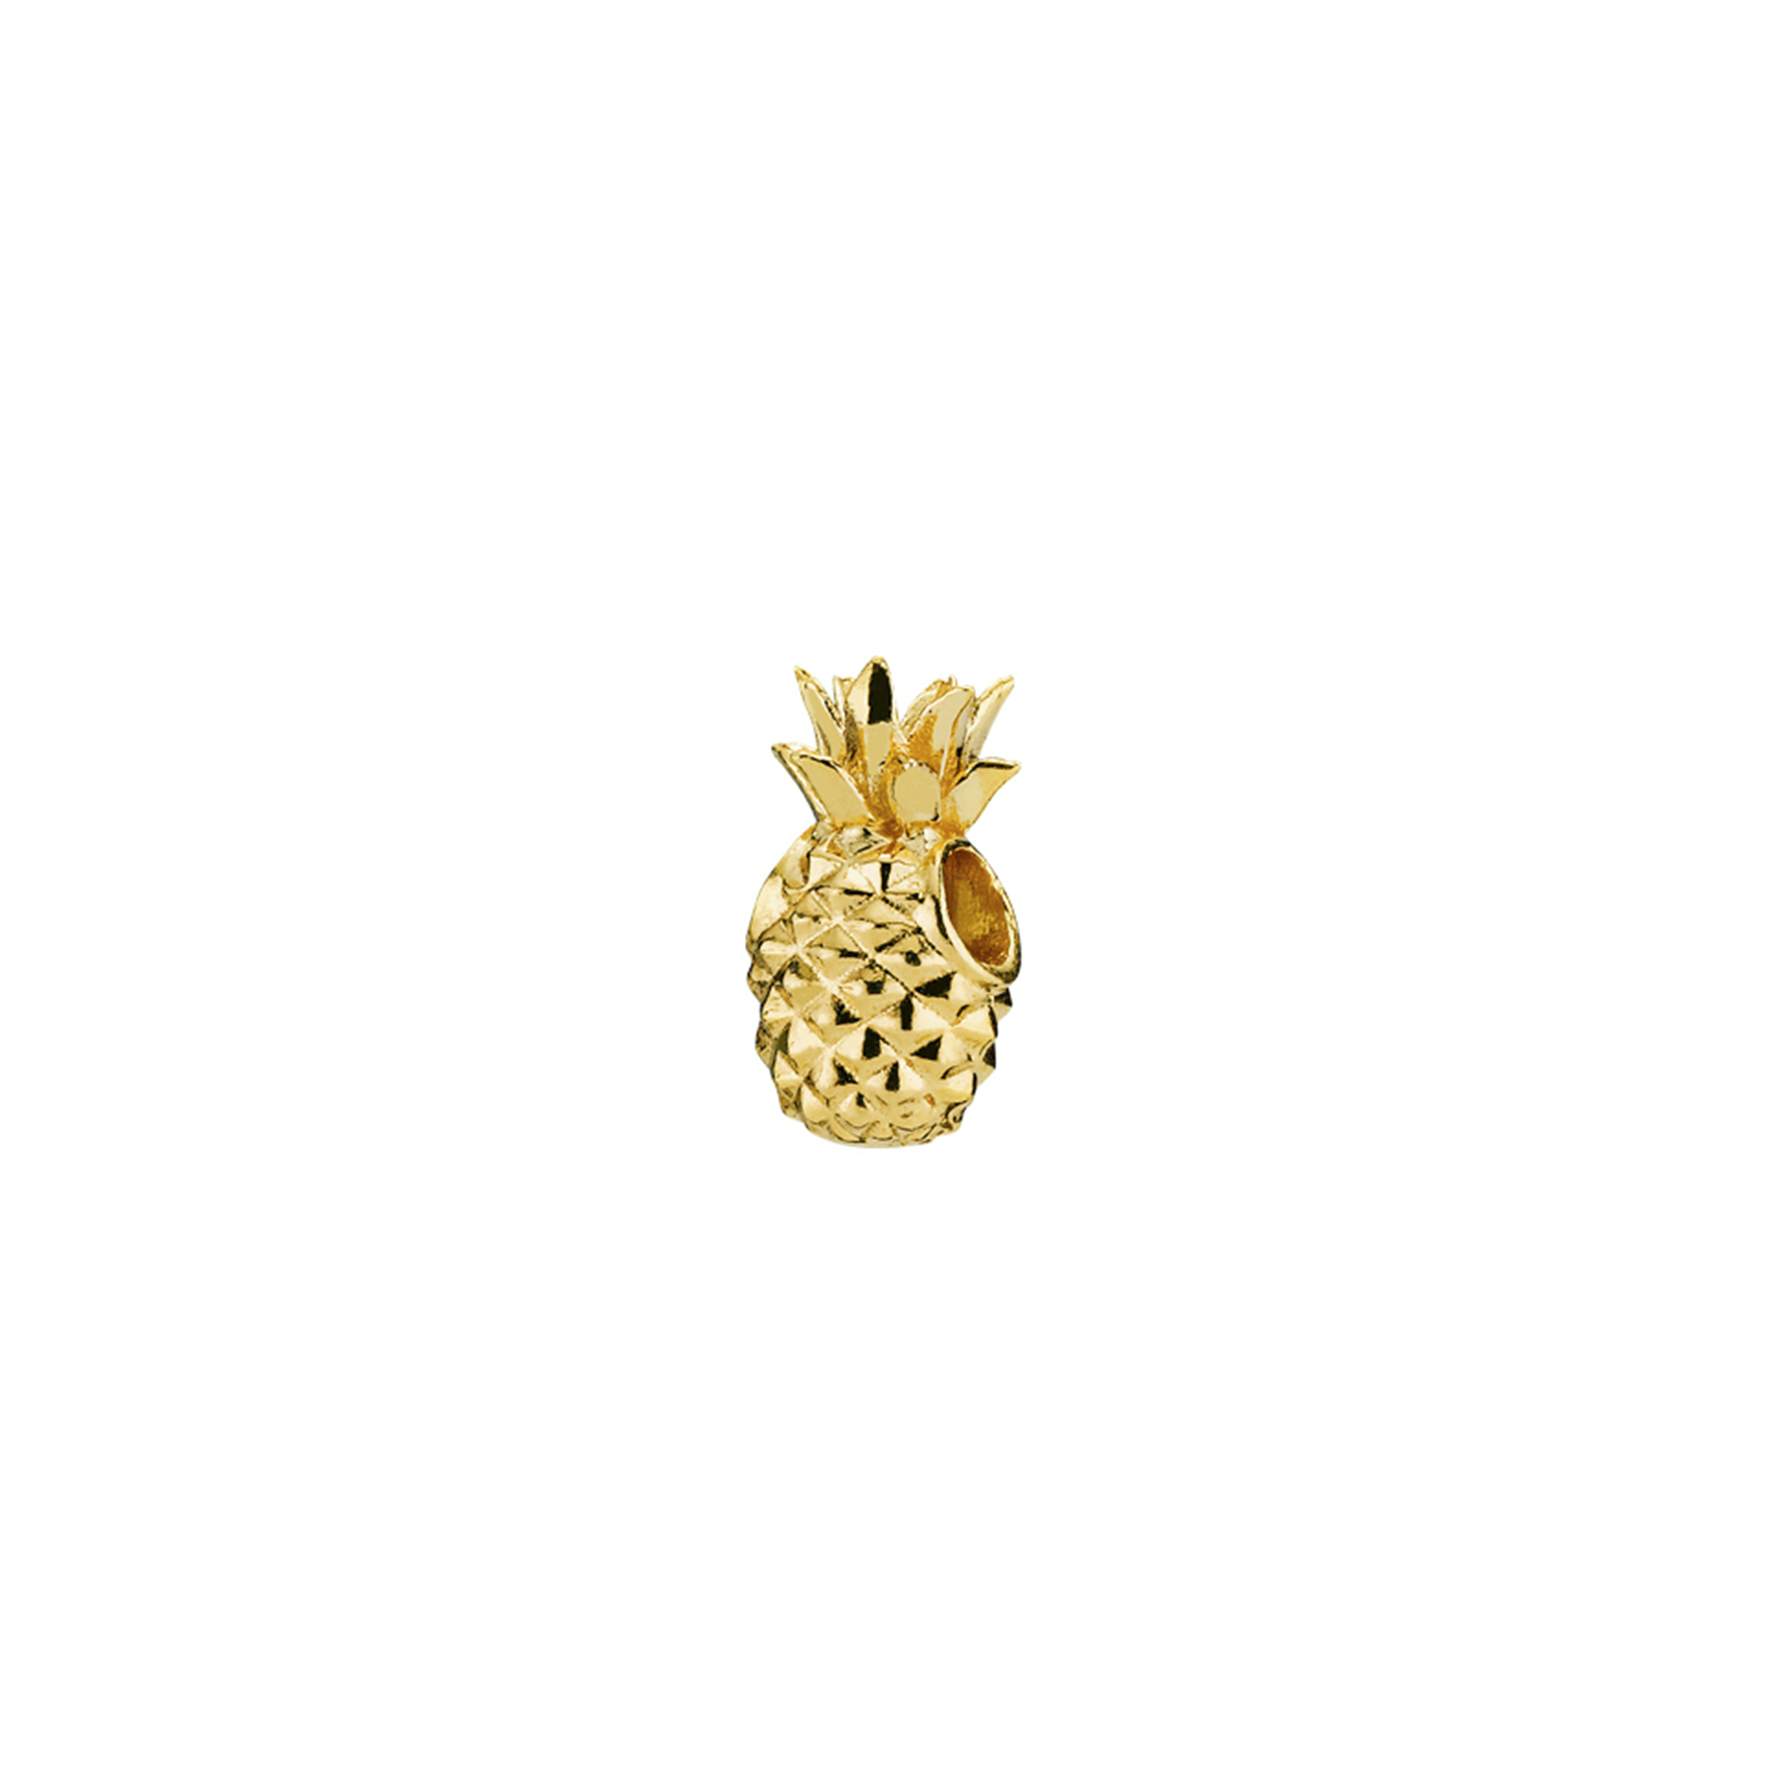 Anna by Sistie Pendant from Sistie in Goldplated-Silver Sterling 925